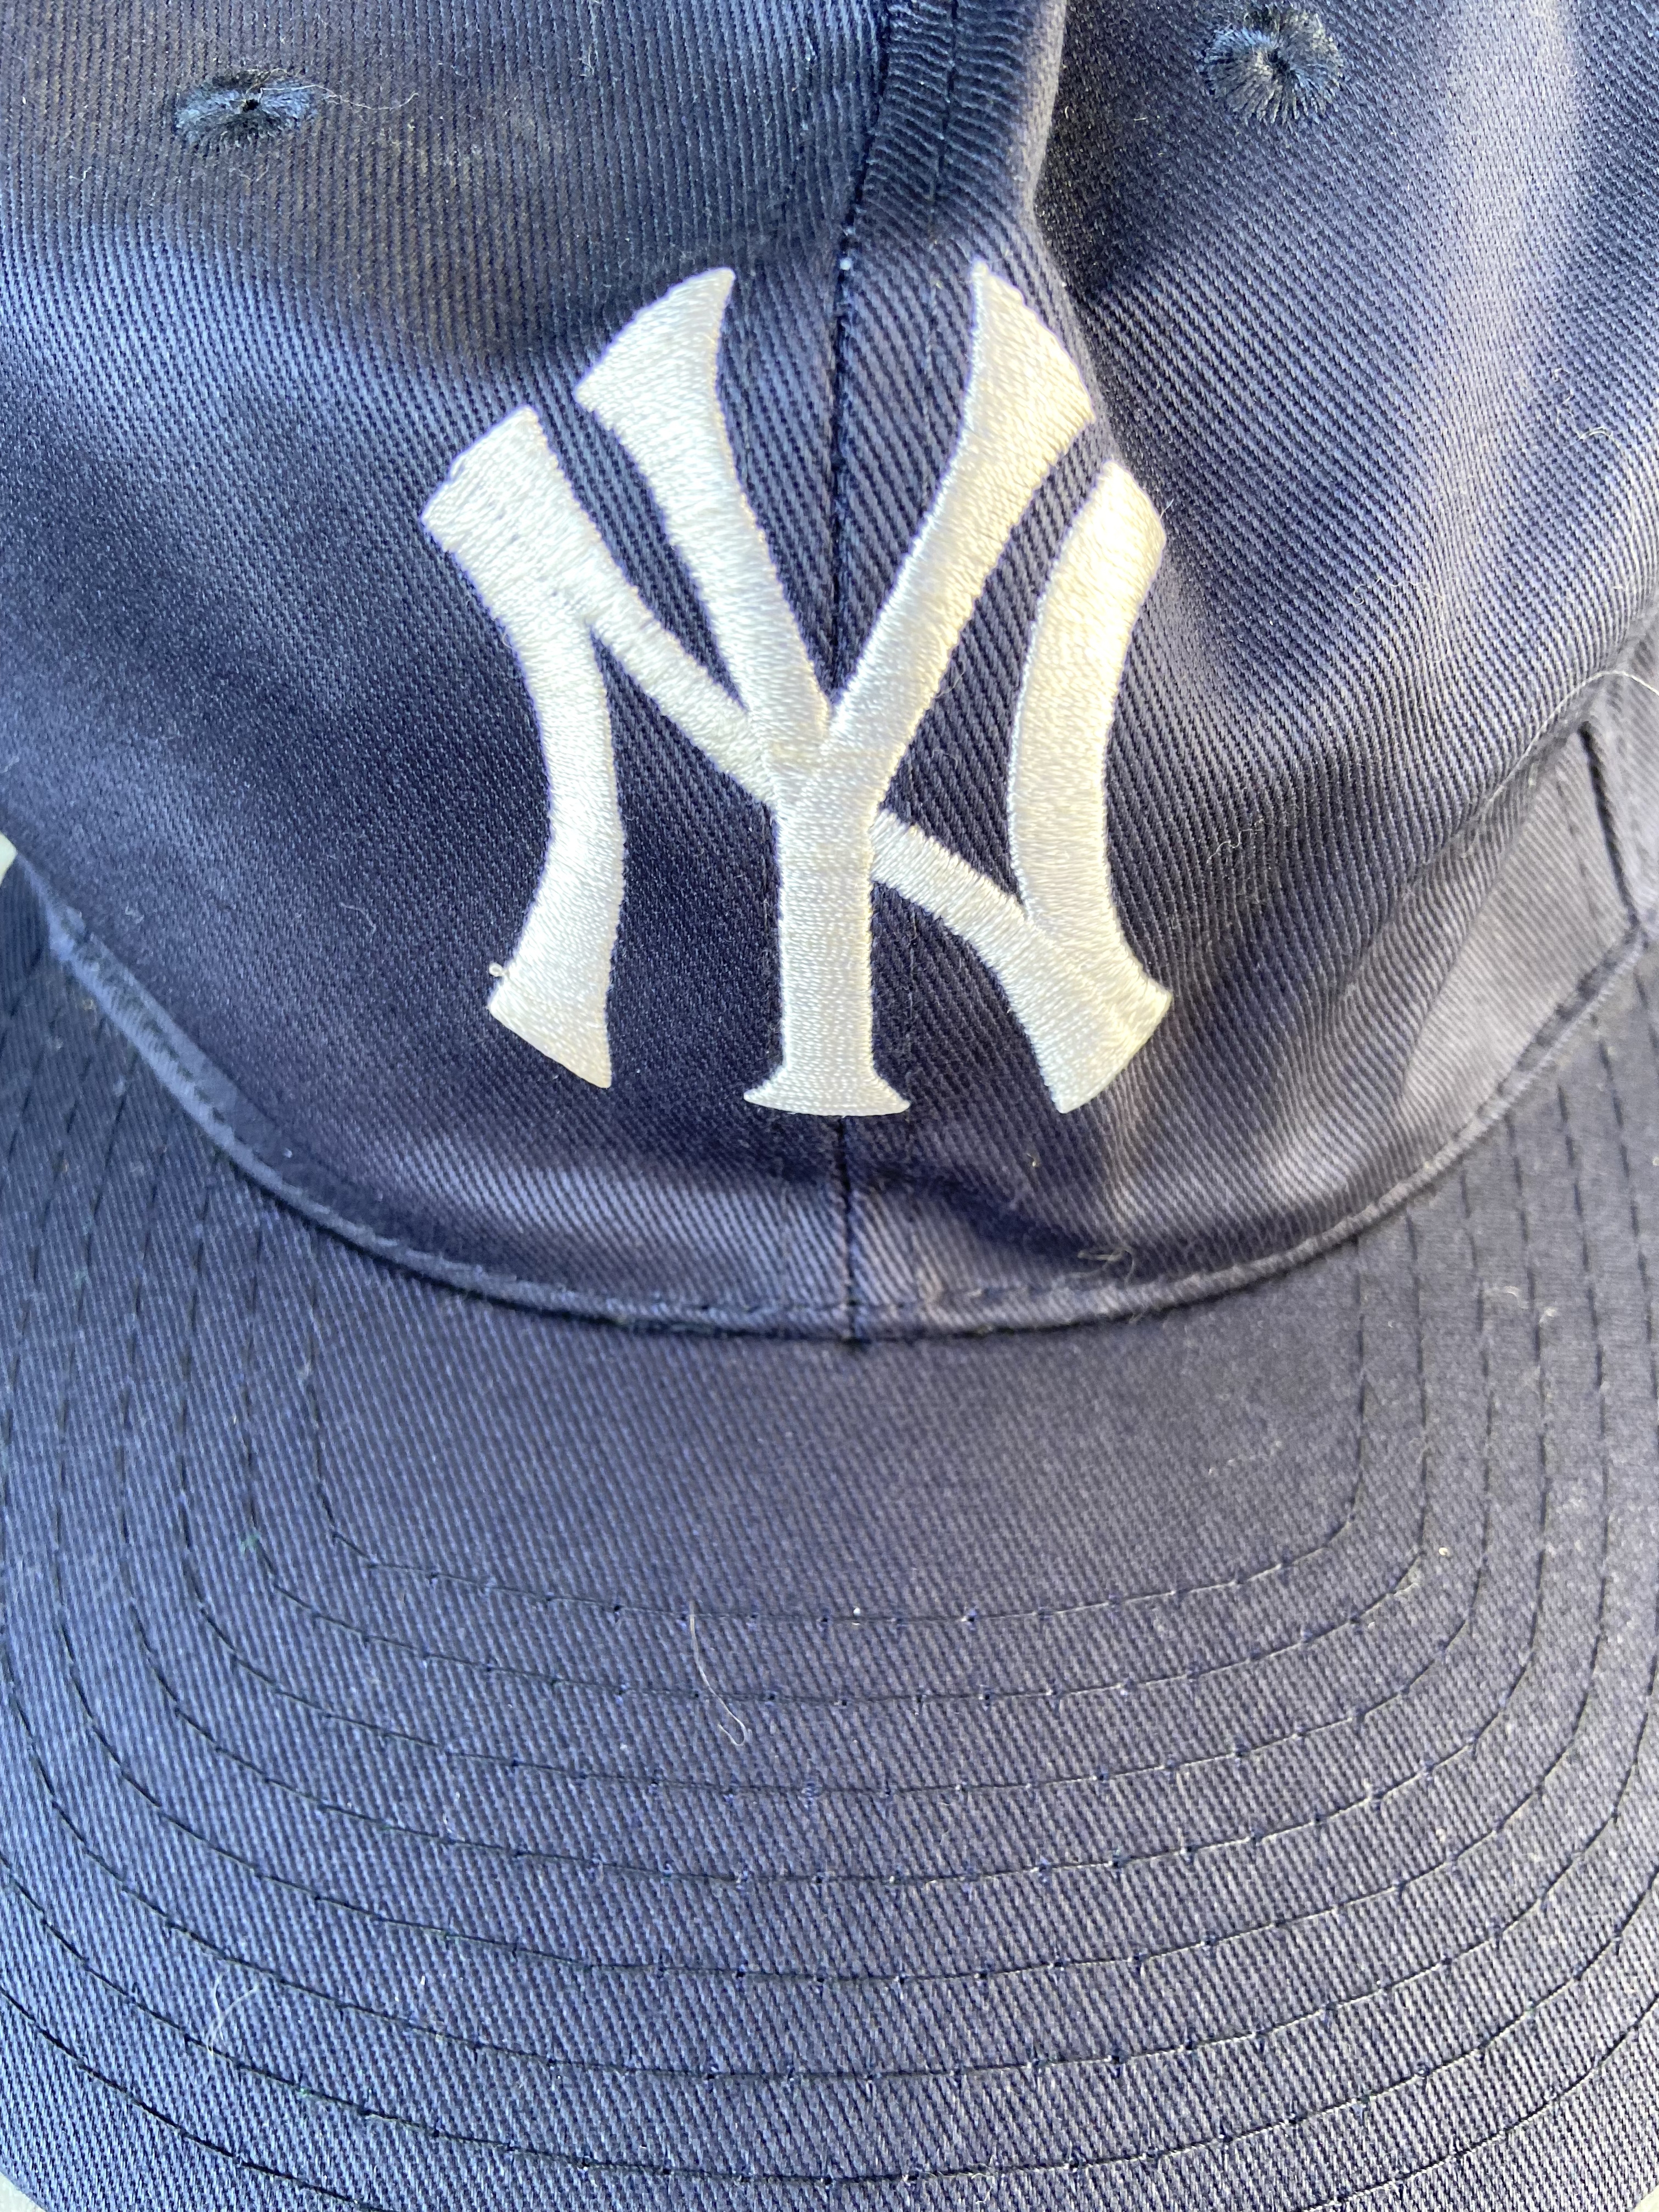 90s unknown New York Yankees キャップ